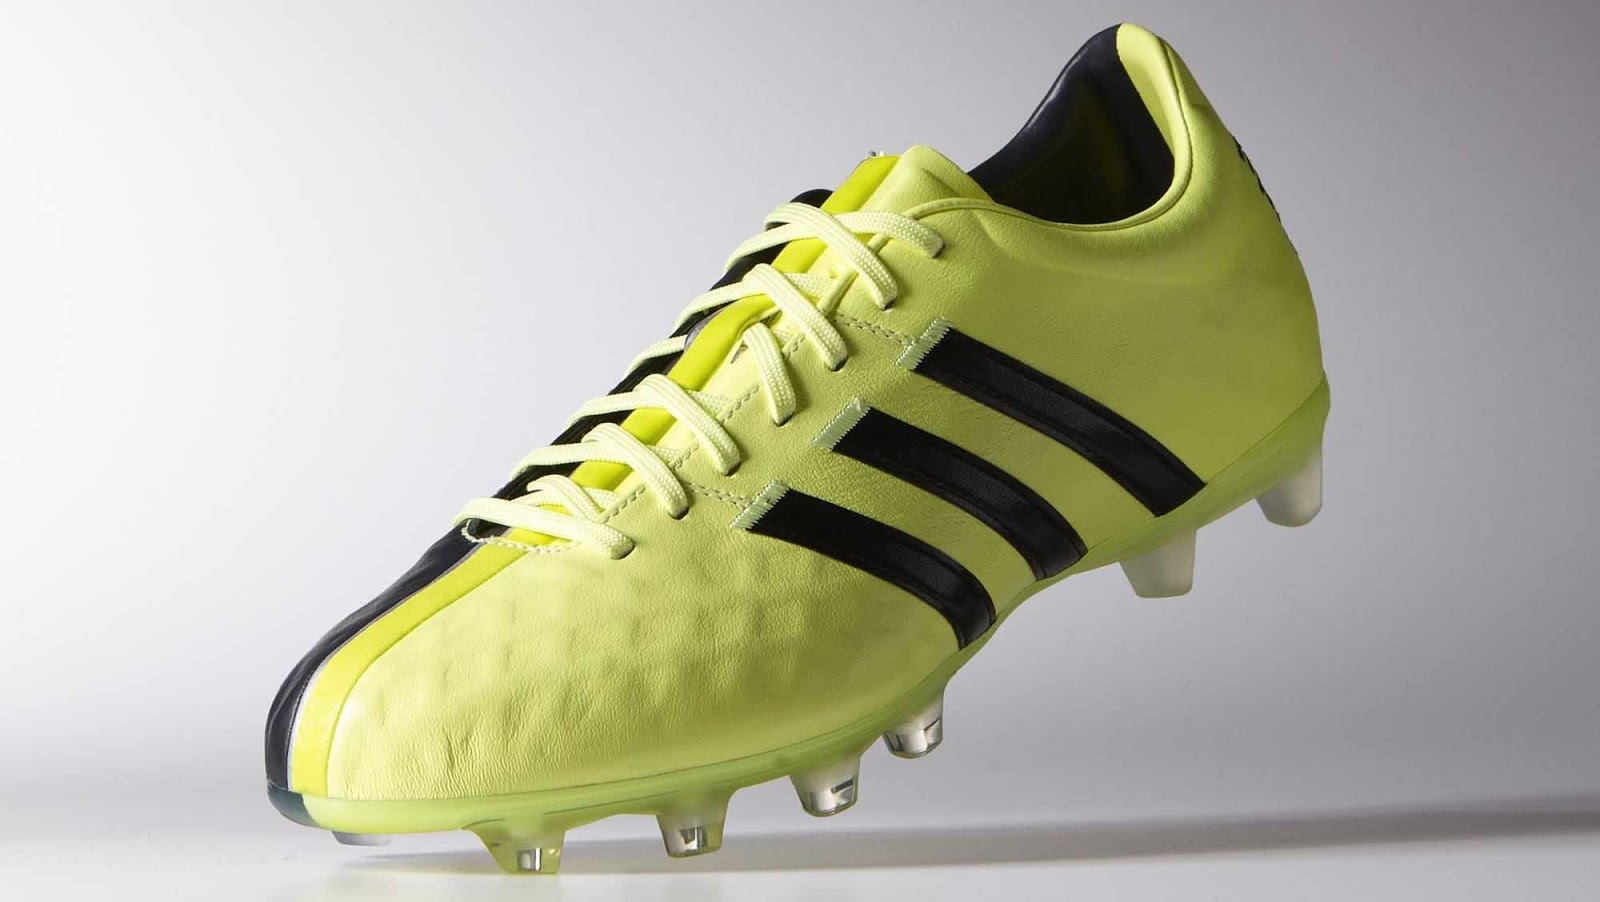 Lime Green Adidas Adipure 11pro 2015 Boots - Footy Headlines